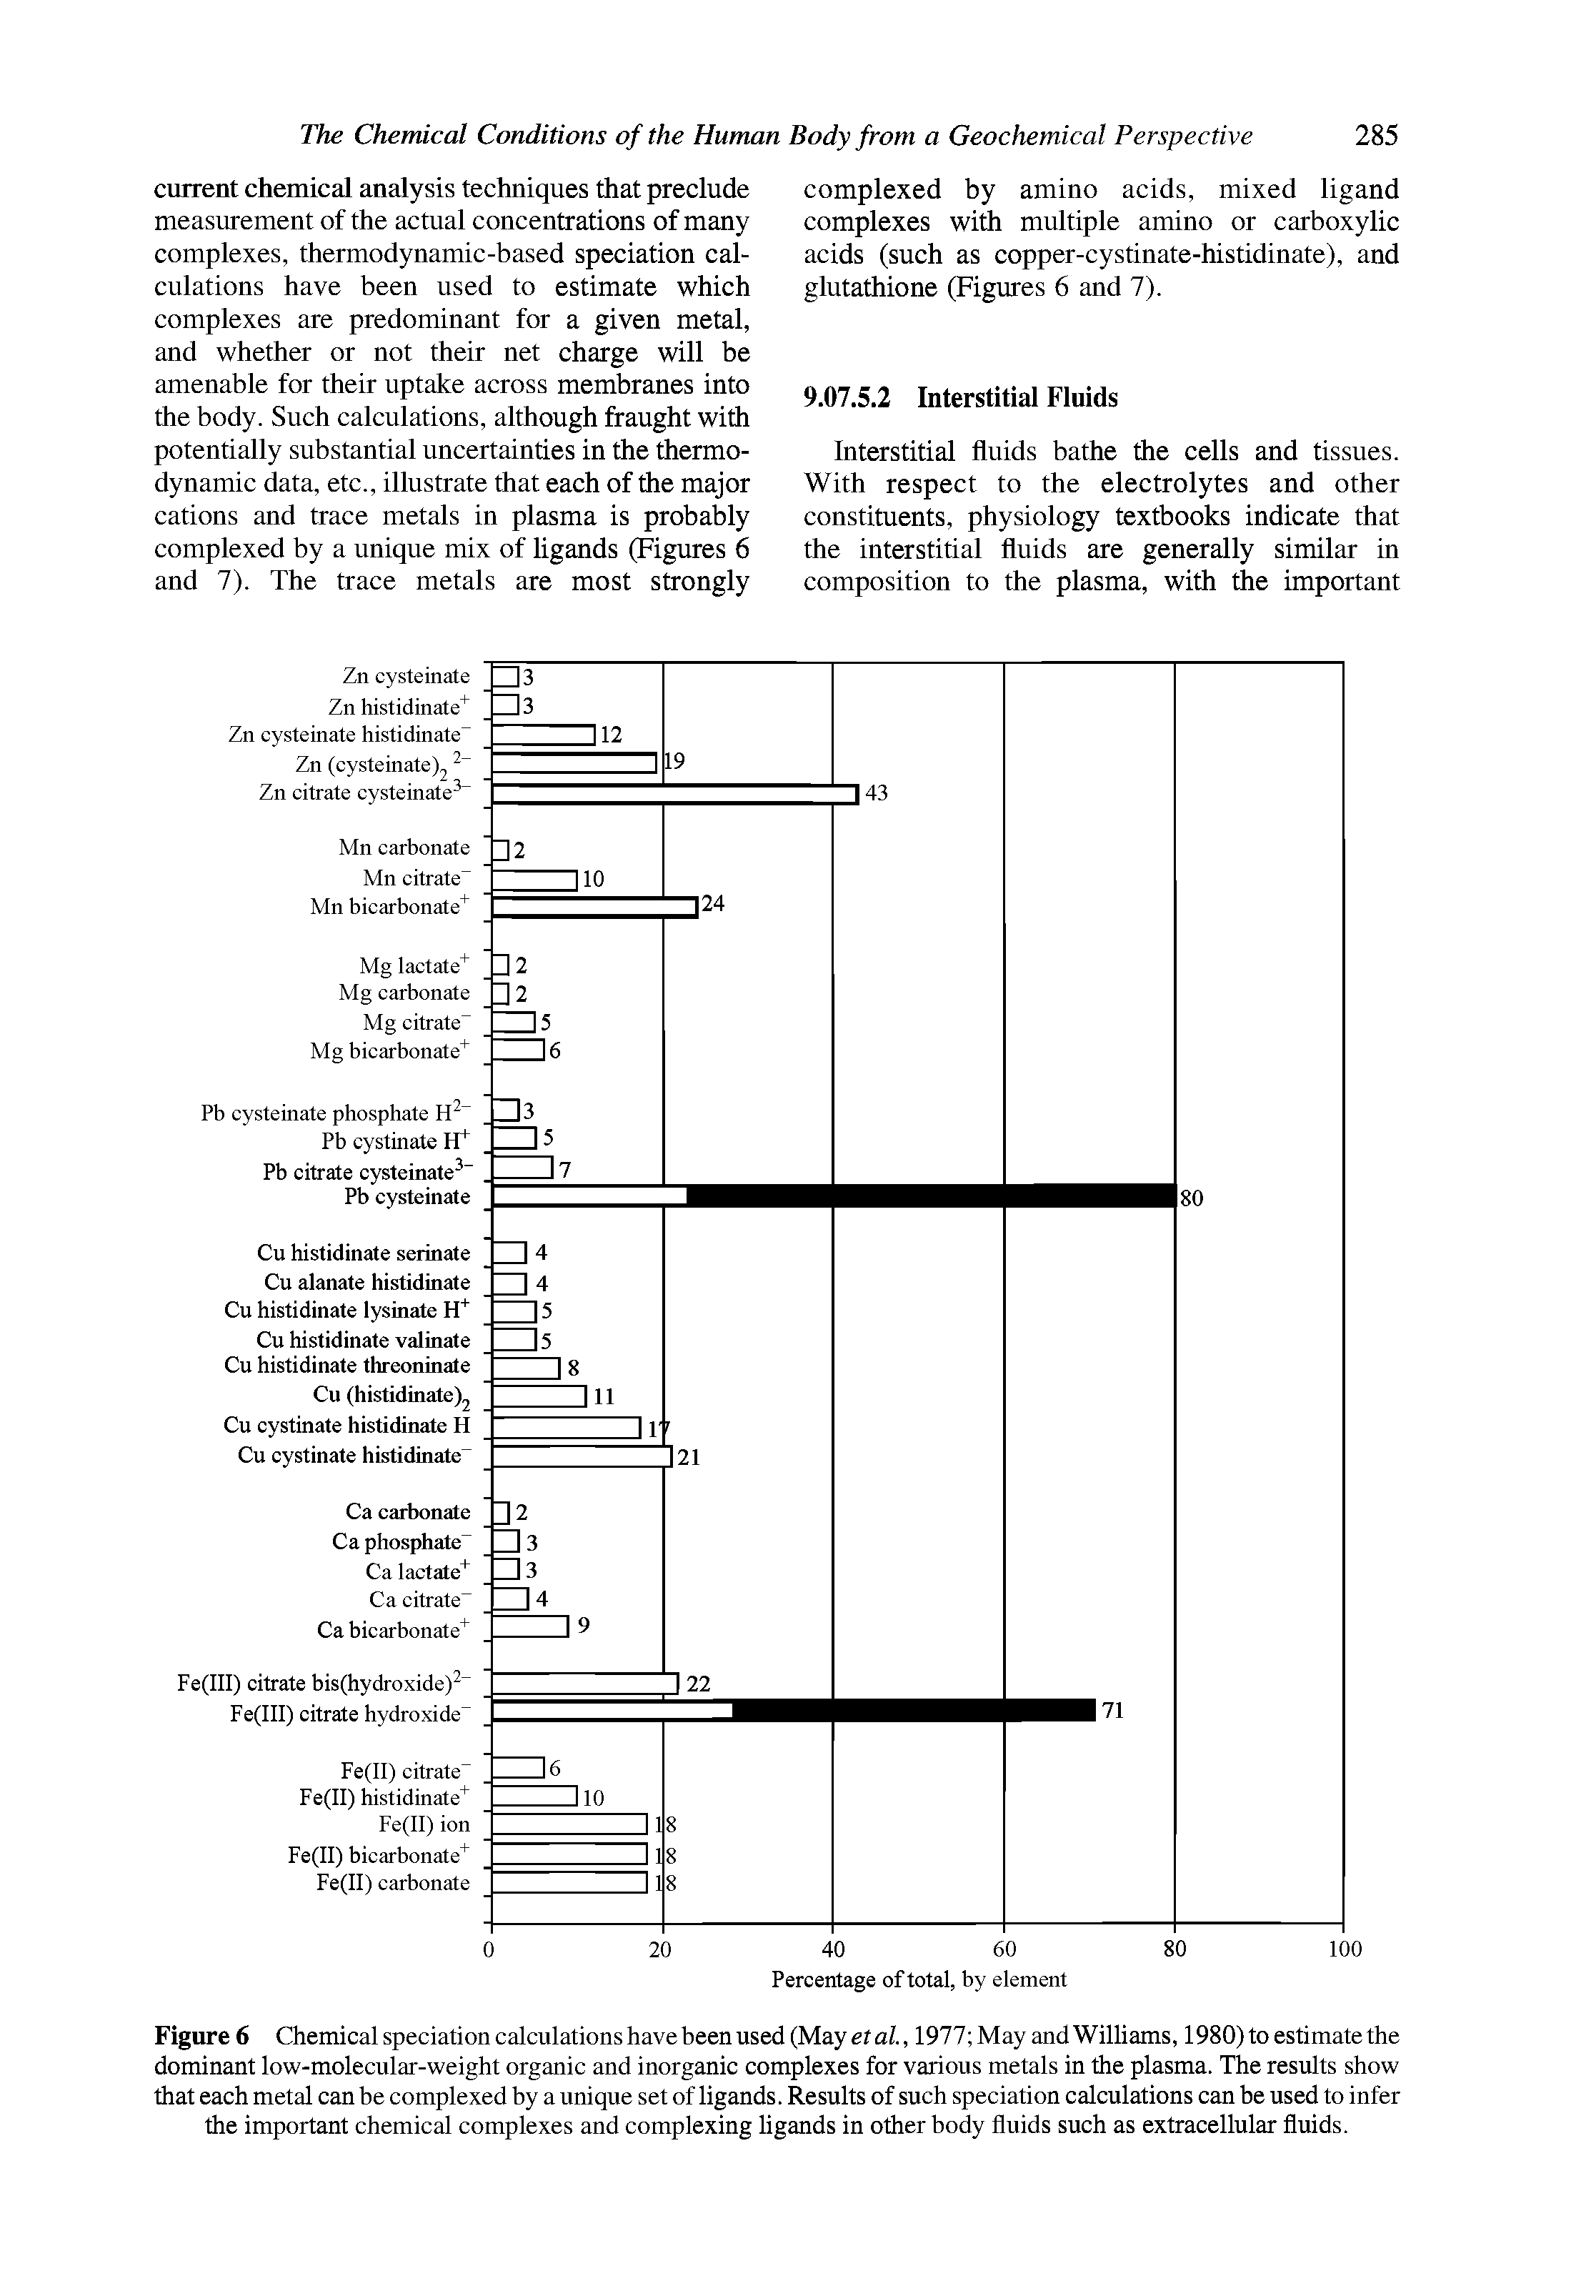 Figure 6 Chemical speciation calculations have been used (May et al.,l911 May and Williams, 1980) to estimate the dominant low-molecular-weight organic and inorganic complexes for various metals in the plasma. The results show that each metal can he complexed hy a unique set of ligands. Results of such speciation calculations can he used to infer the important chemical complexes and complexing ligands in other body fluids such as extracellular fluids.